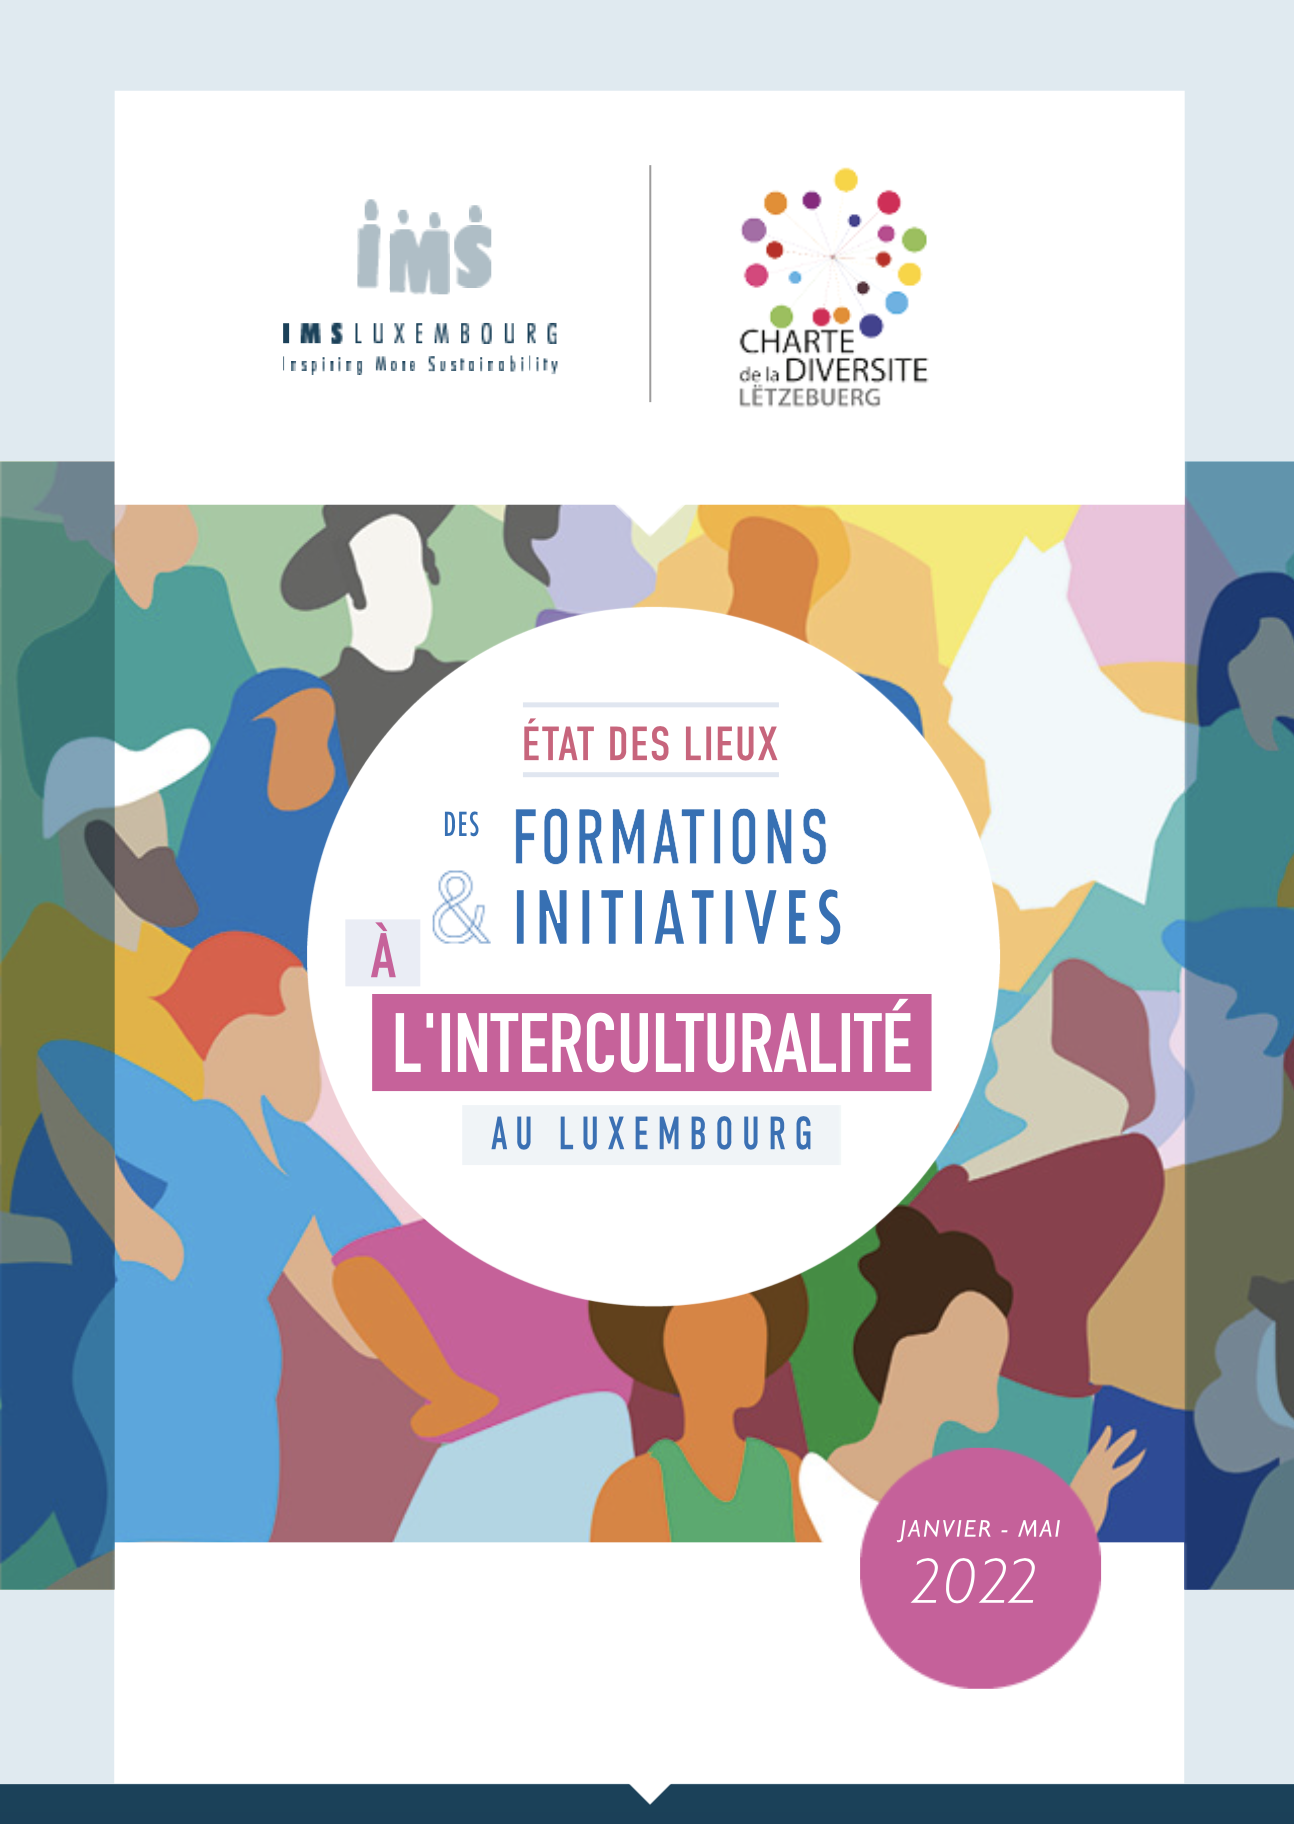 Overview of intercultural training and initiatives in Luxembourg